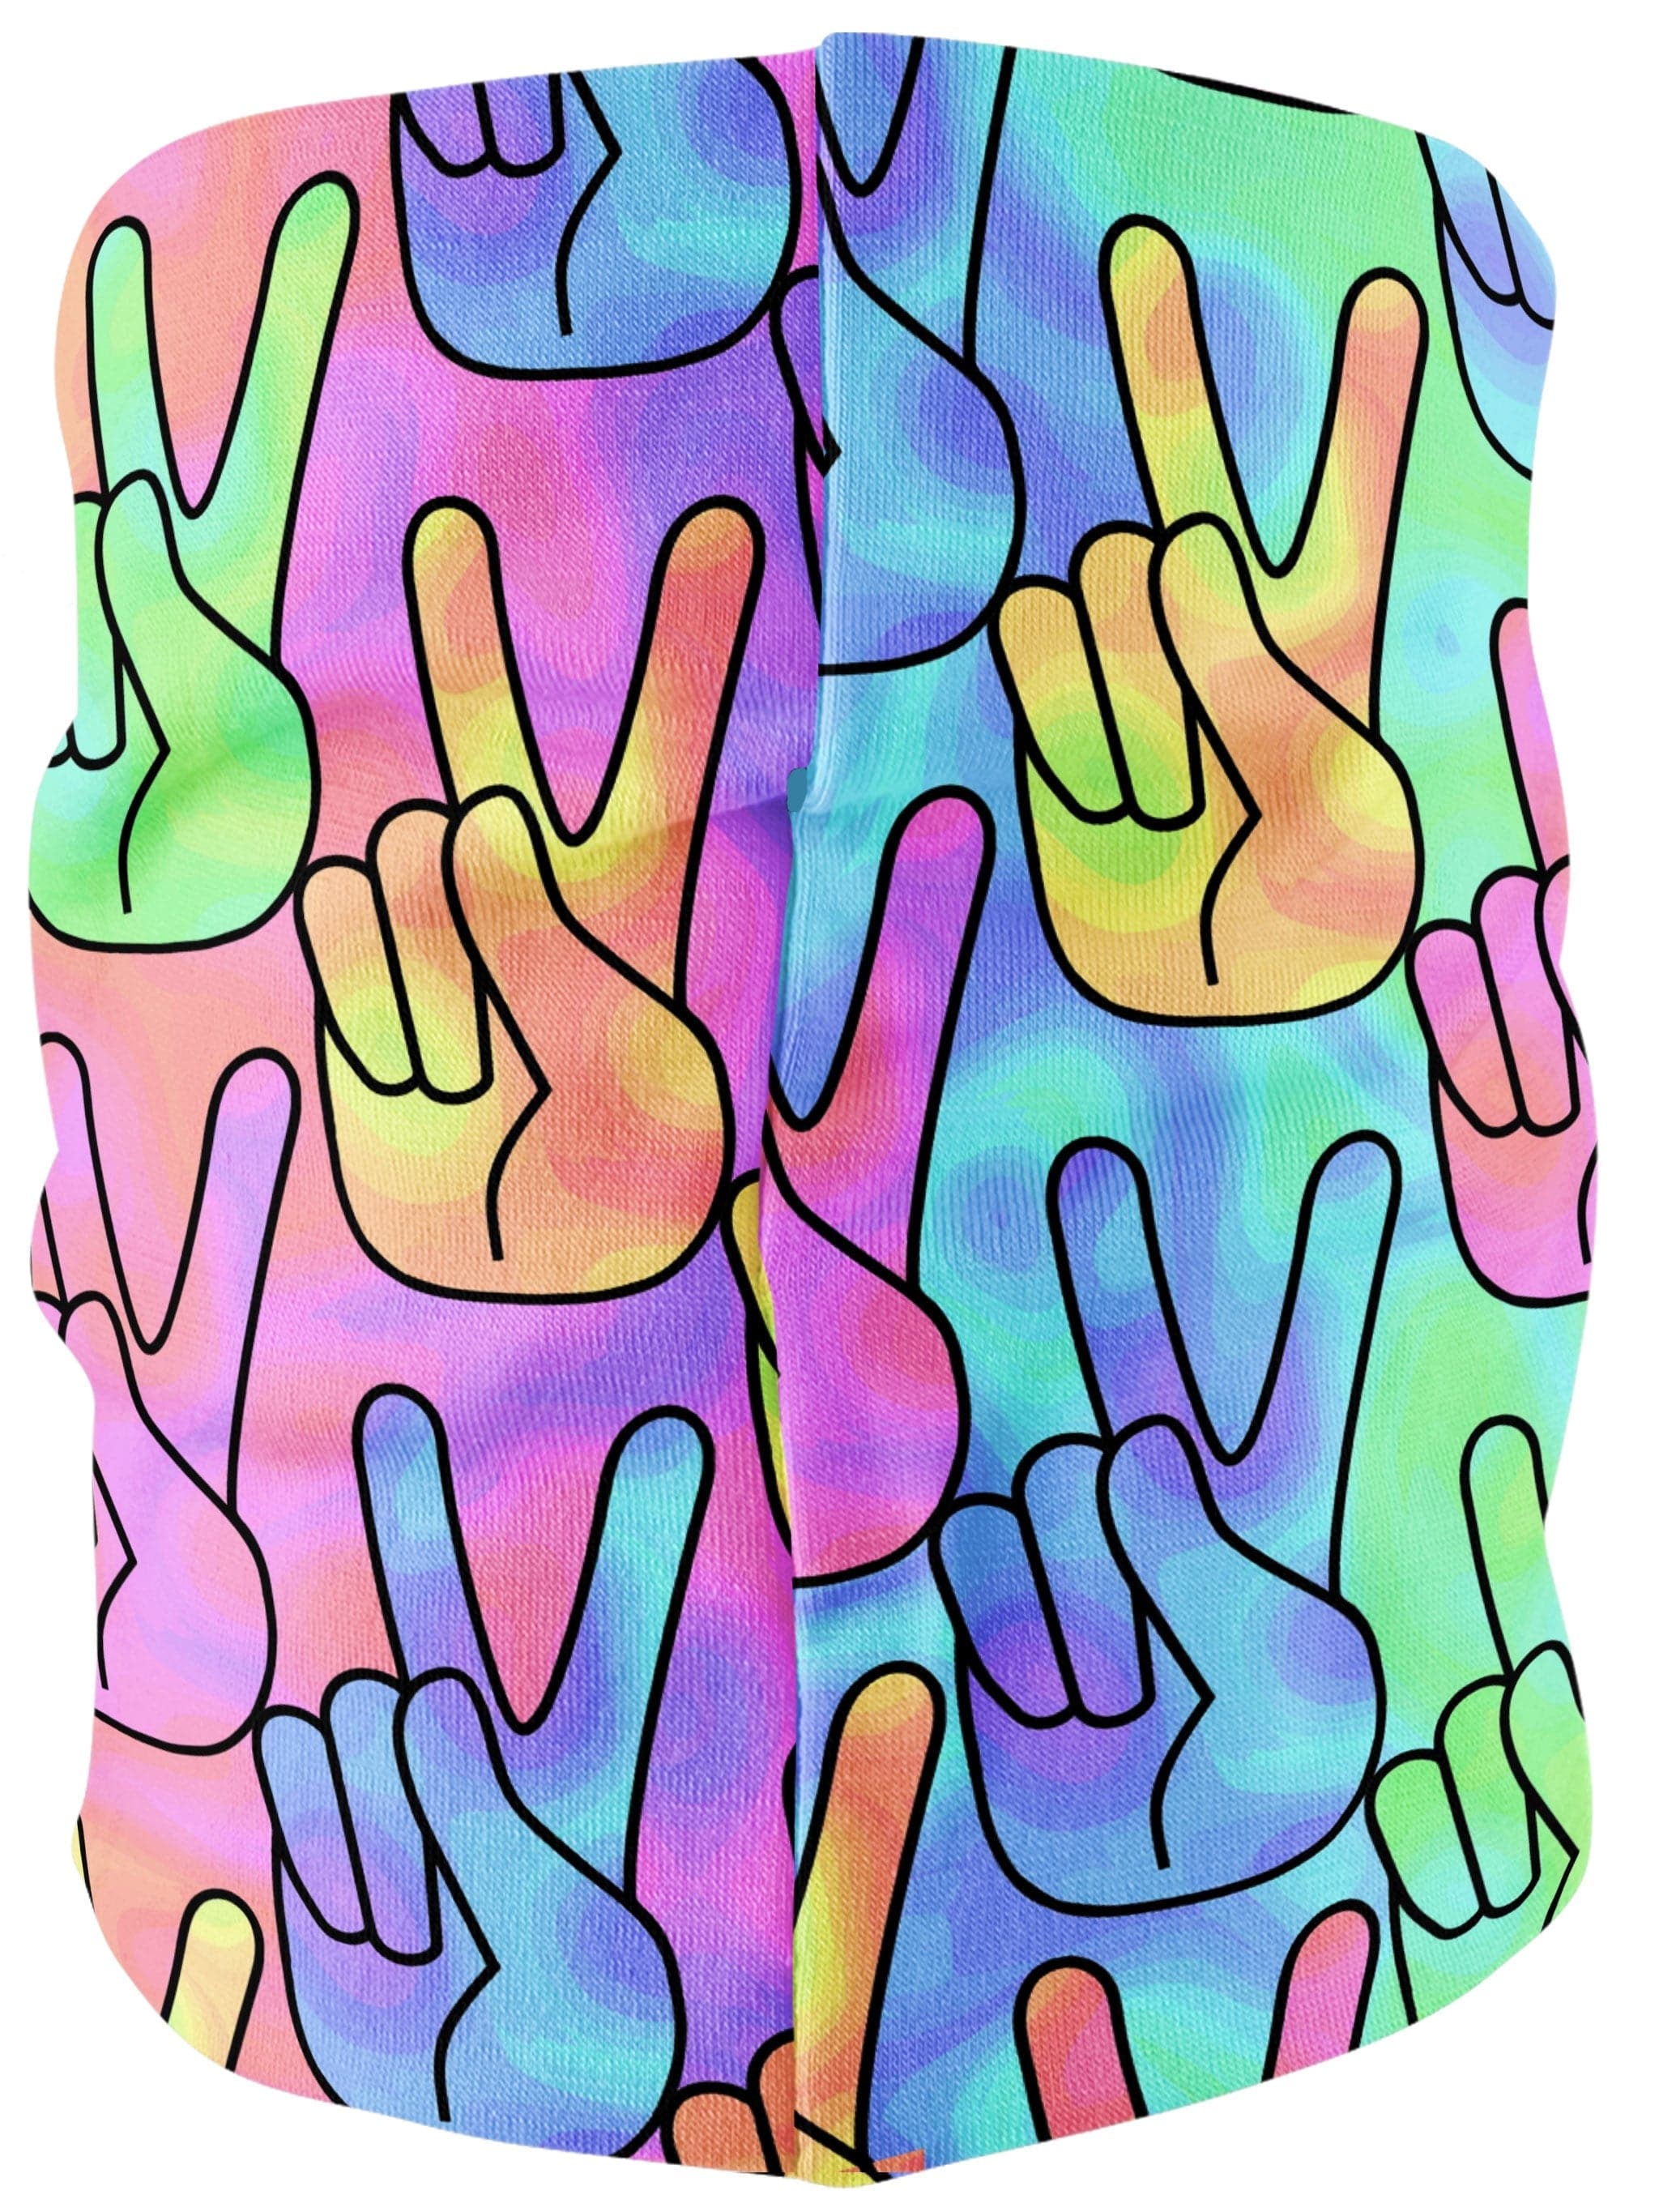 trippy peace sign drawings